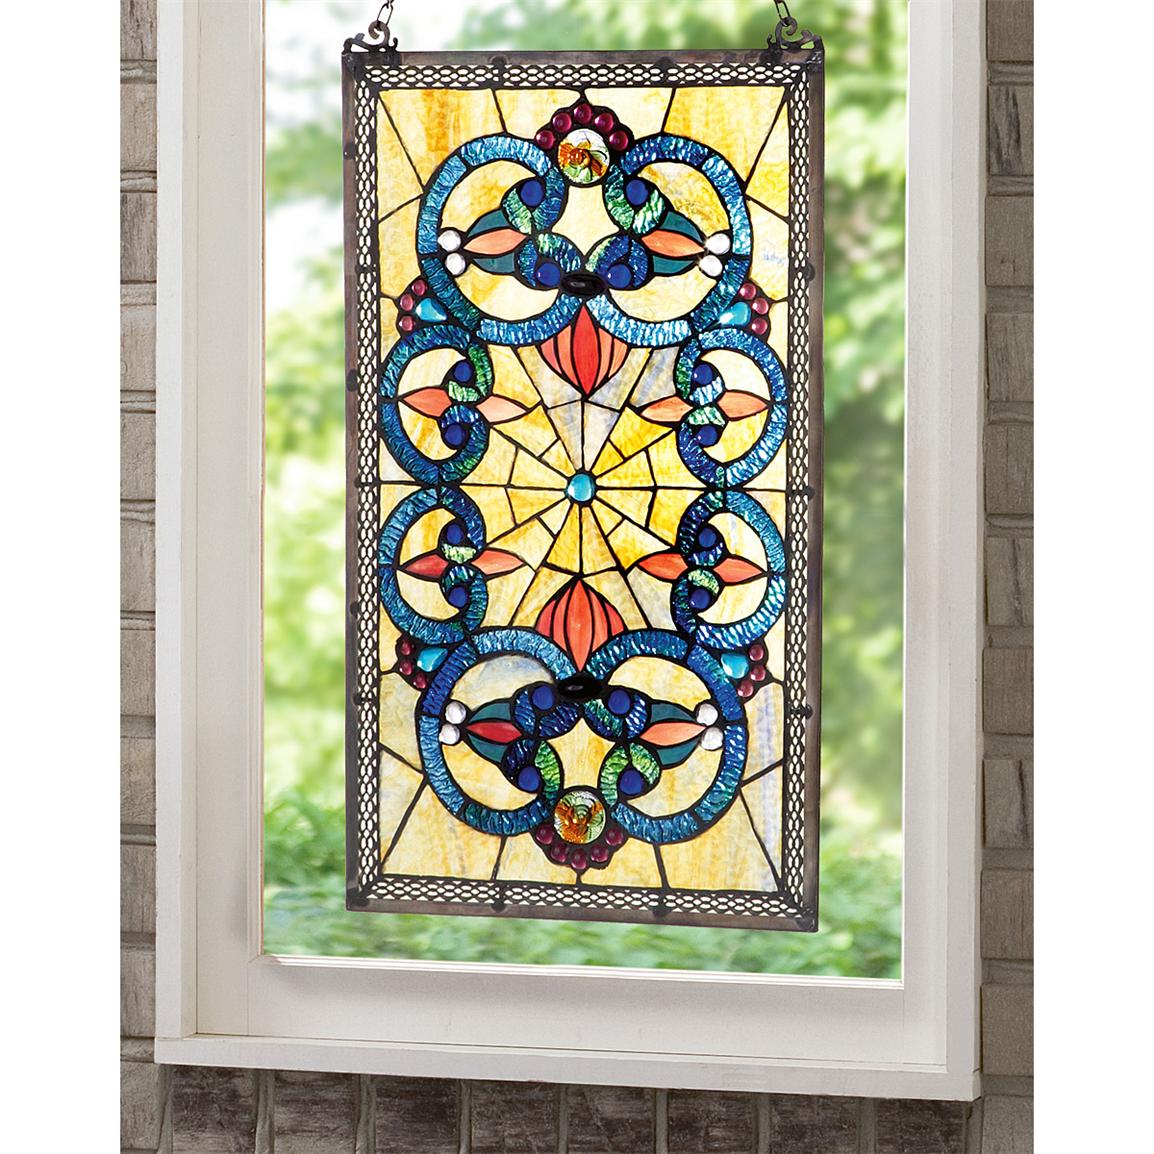 Corrista Tiffany  style Stained Glass Window Panel  219669, Decorative Accessories at 